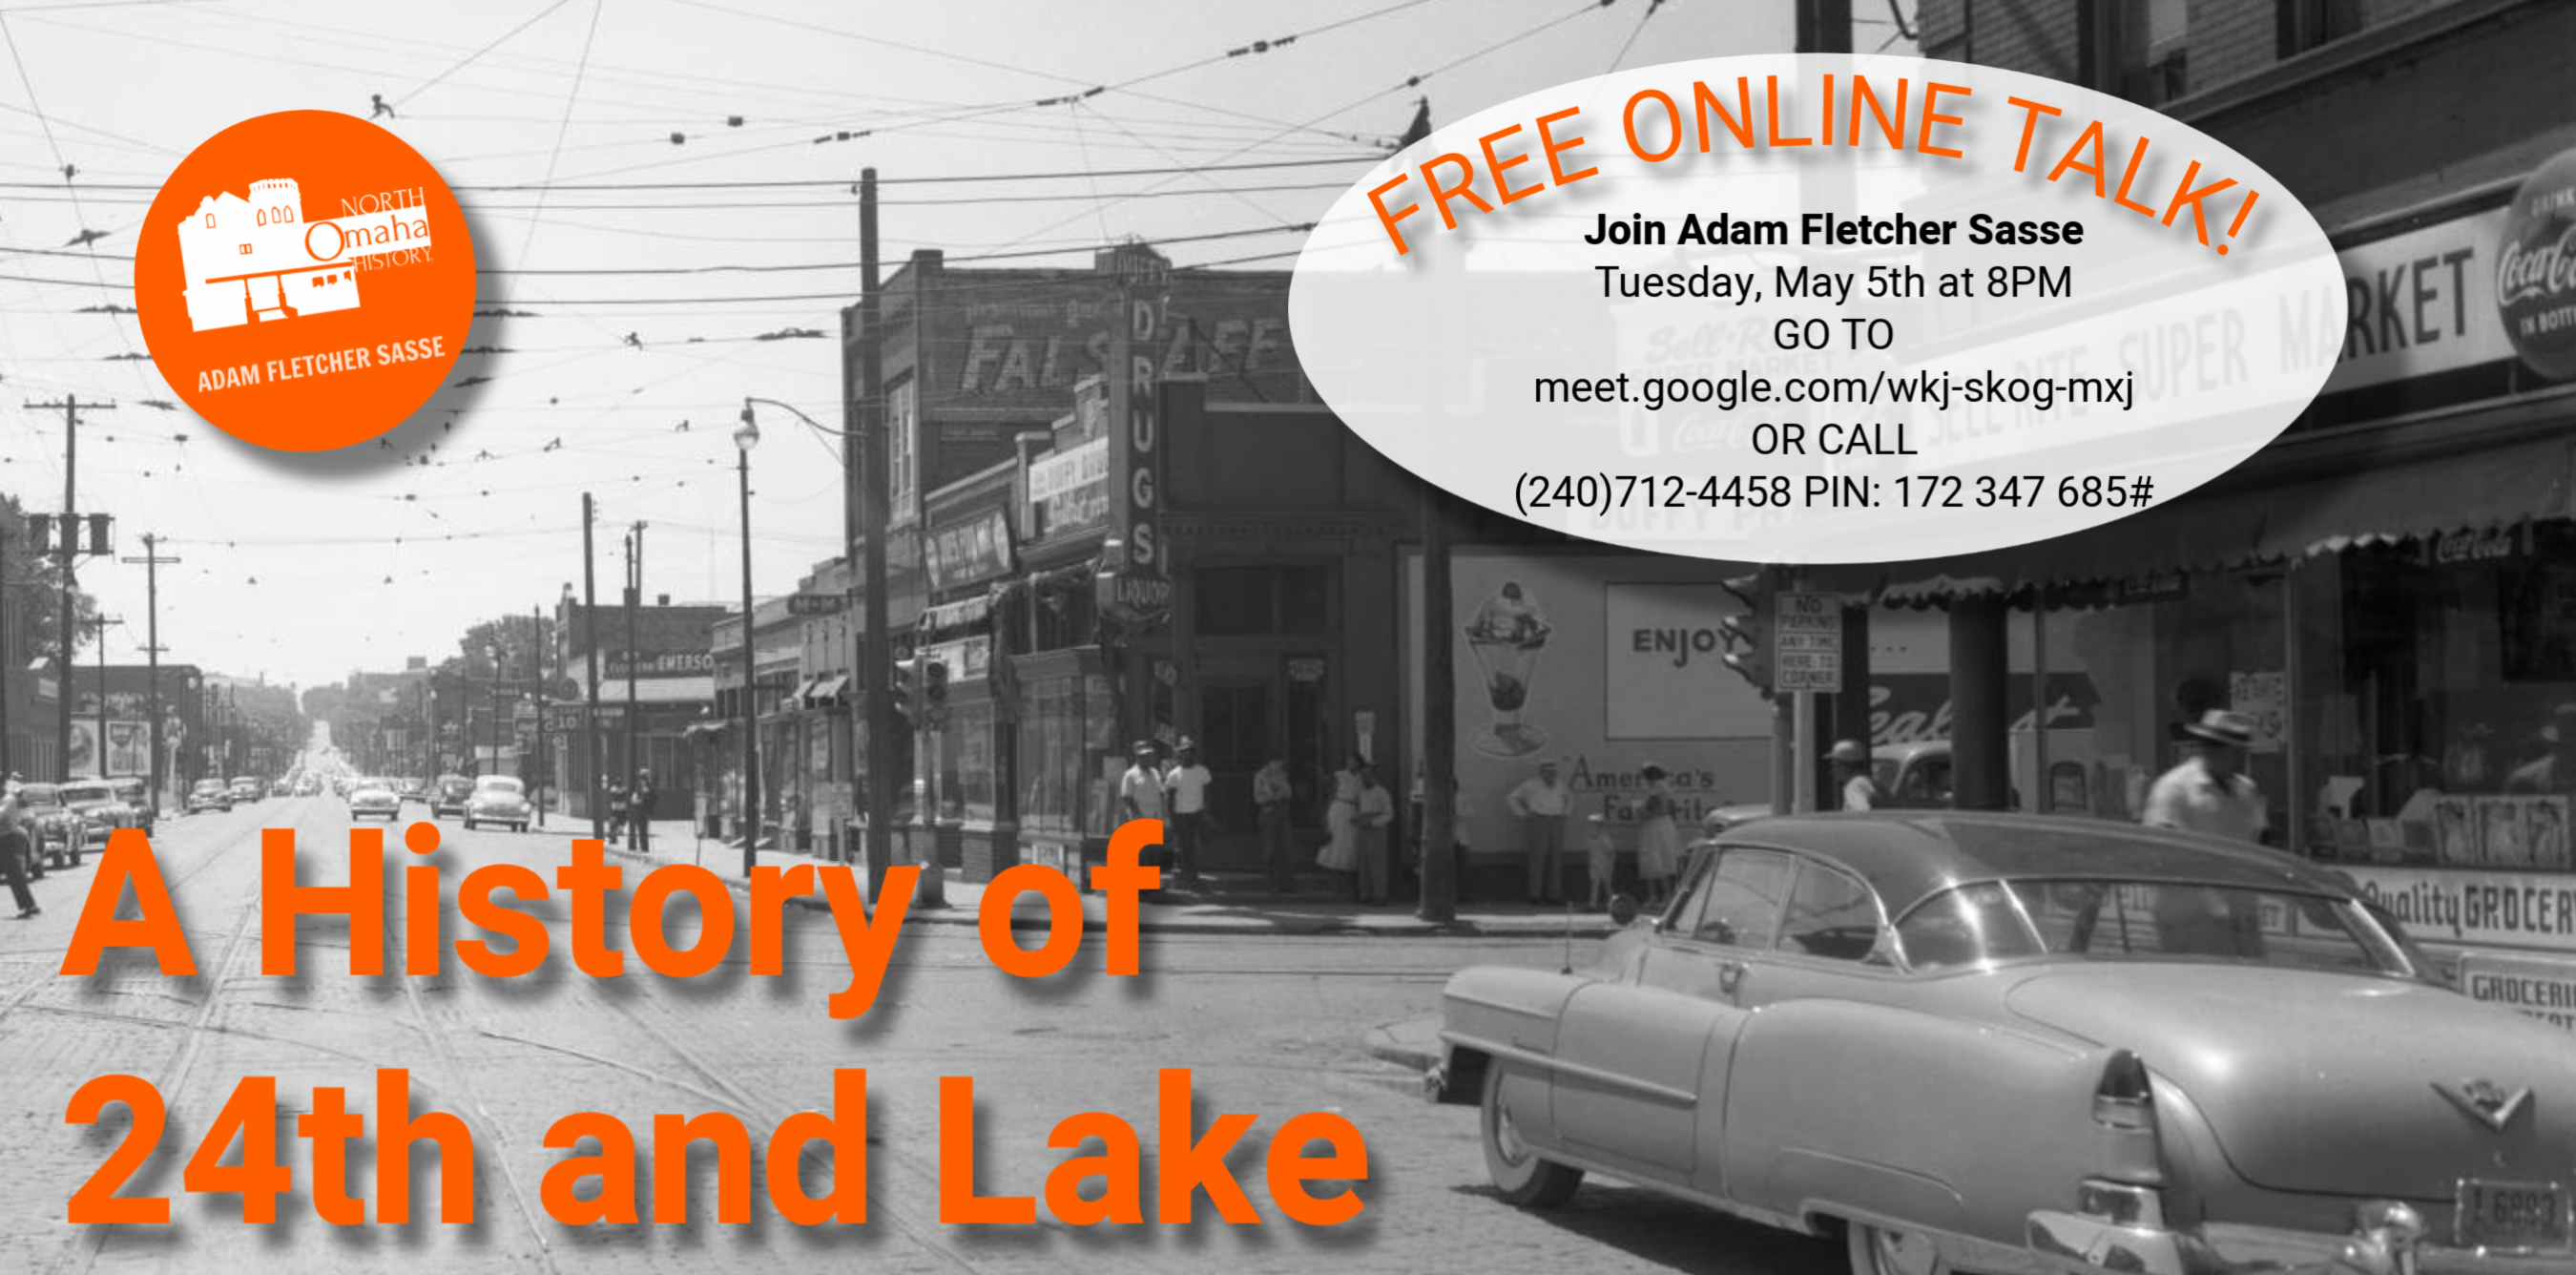 "A History of 24th and Lake" Online Talk by Adam Fletcher Sasse, May 5, 2020